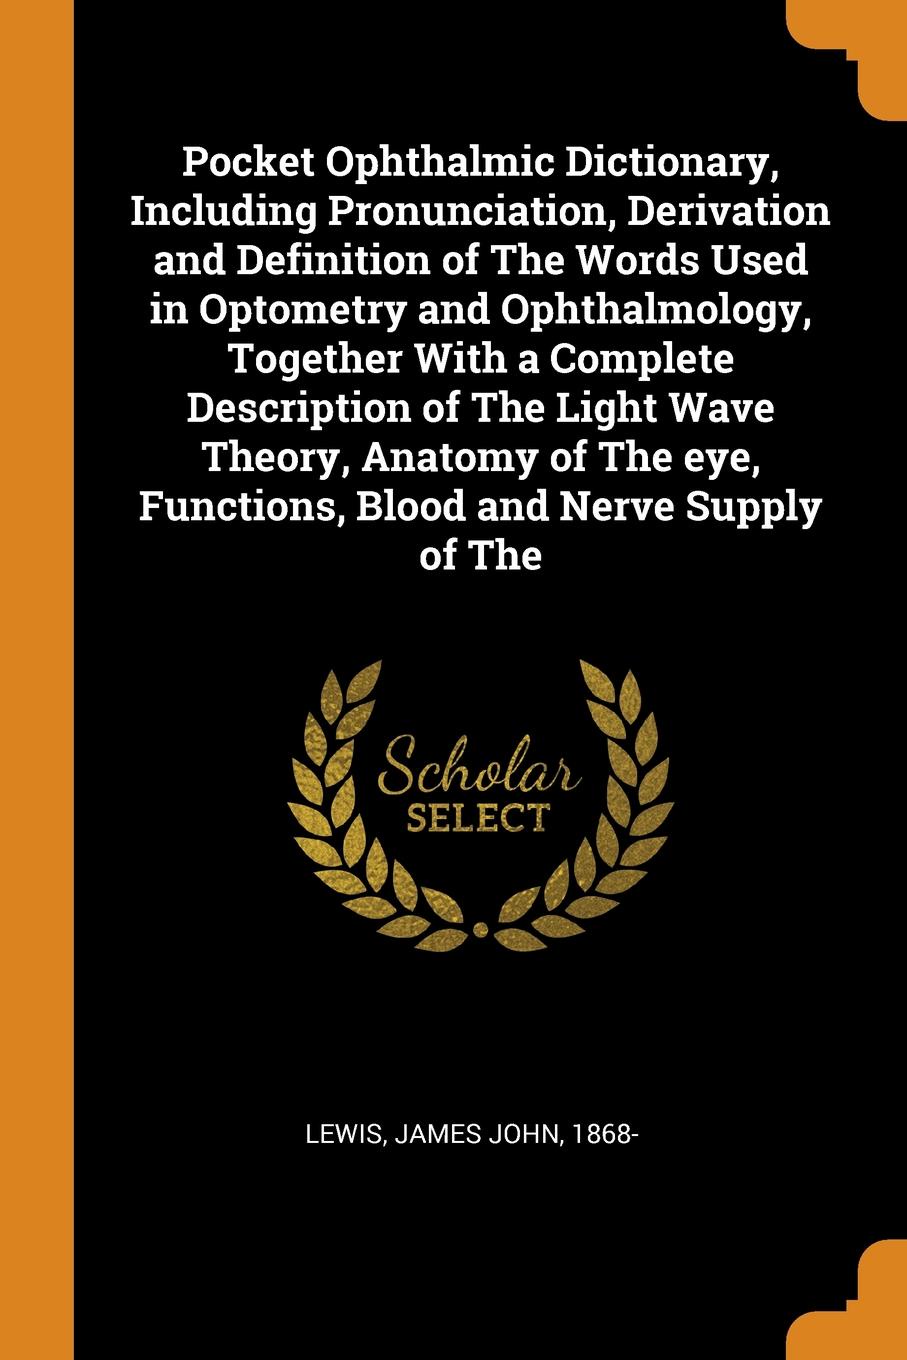 Pocket Ophthalmic Dictionary, Including Pronunciation, Derivation and Definition of The Words Used in Optometry and Ophthalmology, Together With a Complete Description of The Light Wave Theory, Anatomy of The eye, Functions, Blood and Nerve Supply...